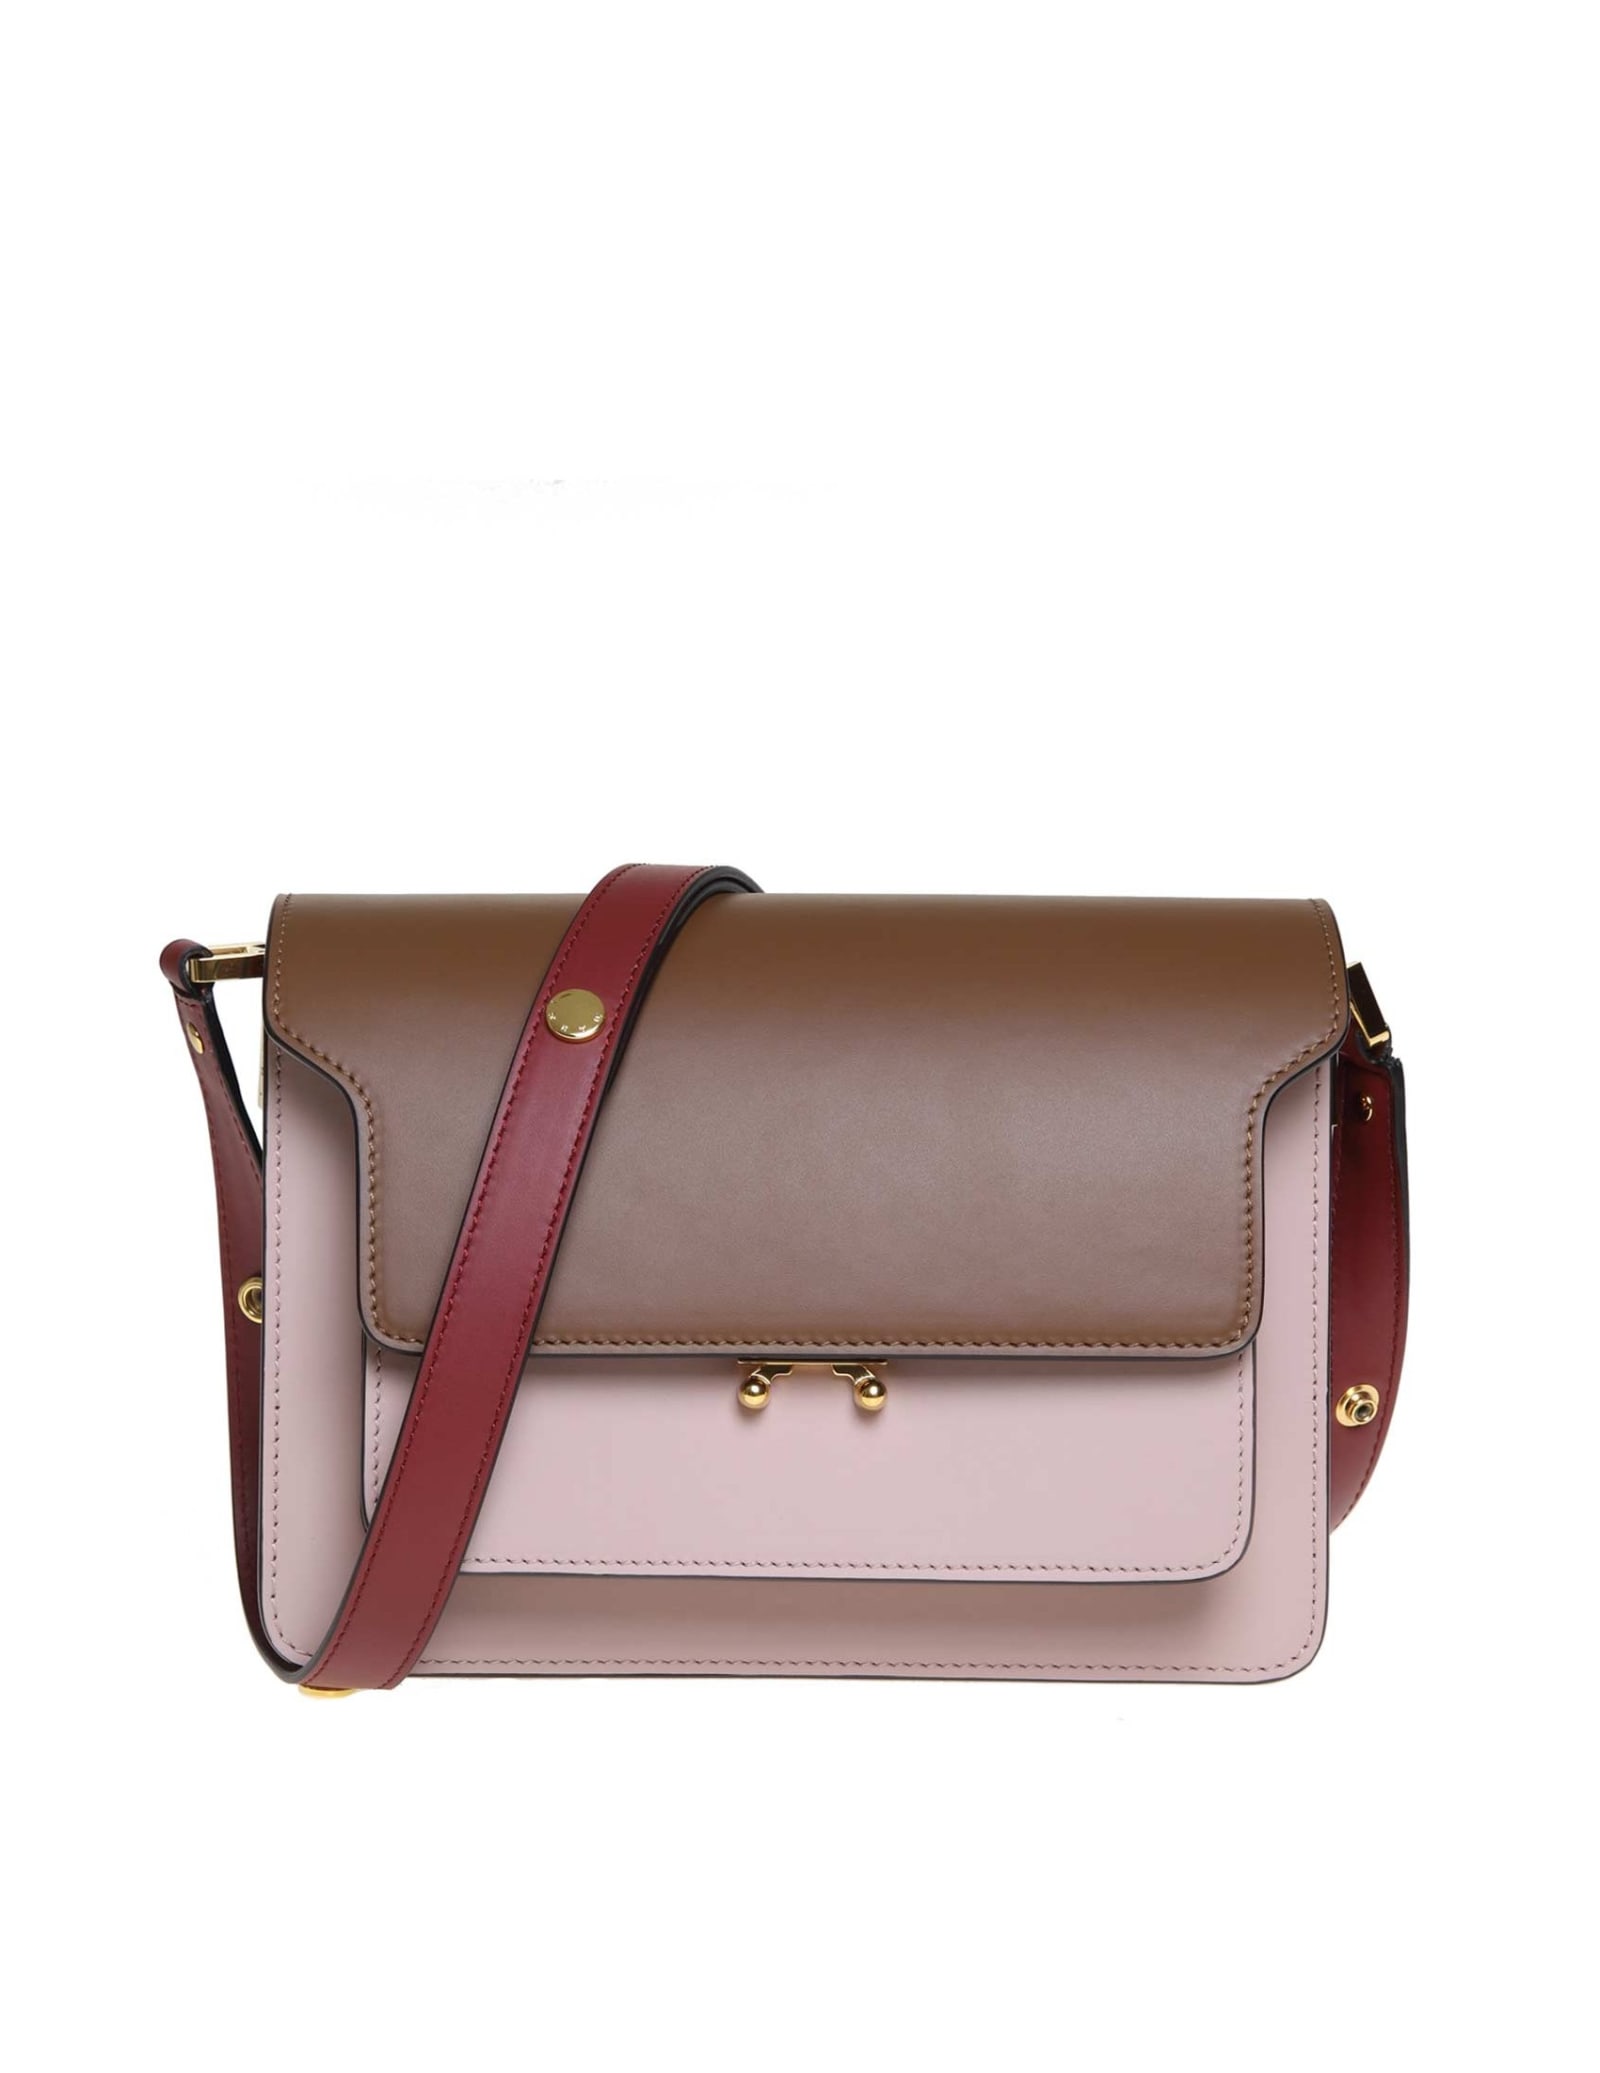 Marni Trunk Bag In Brown And Powder Leather